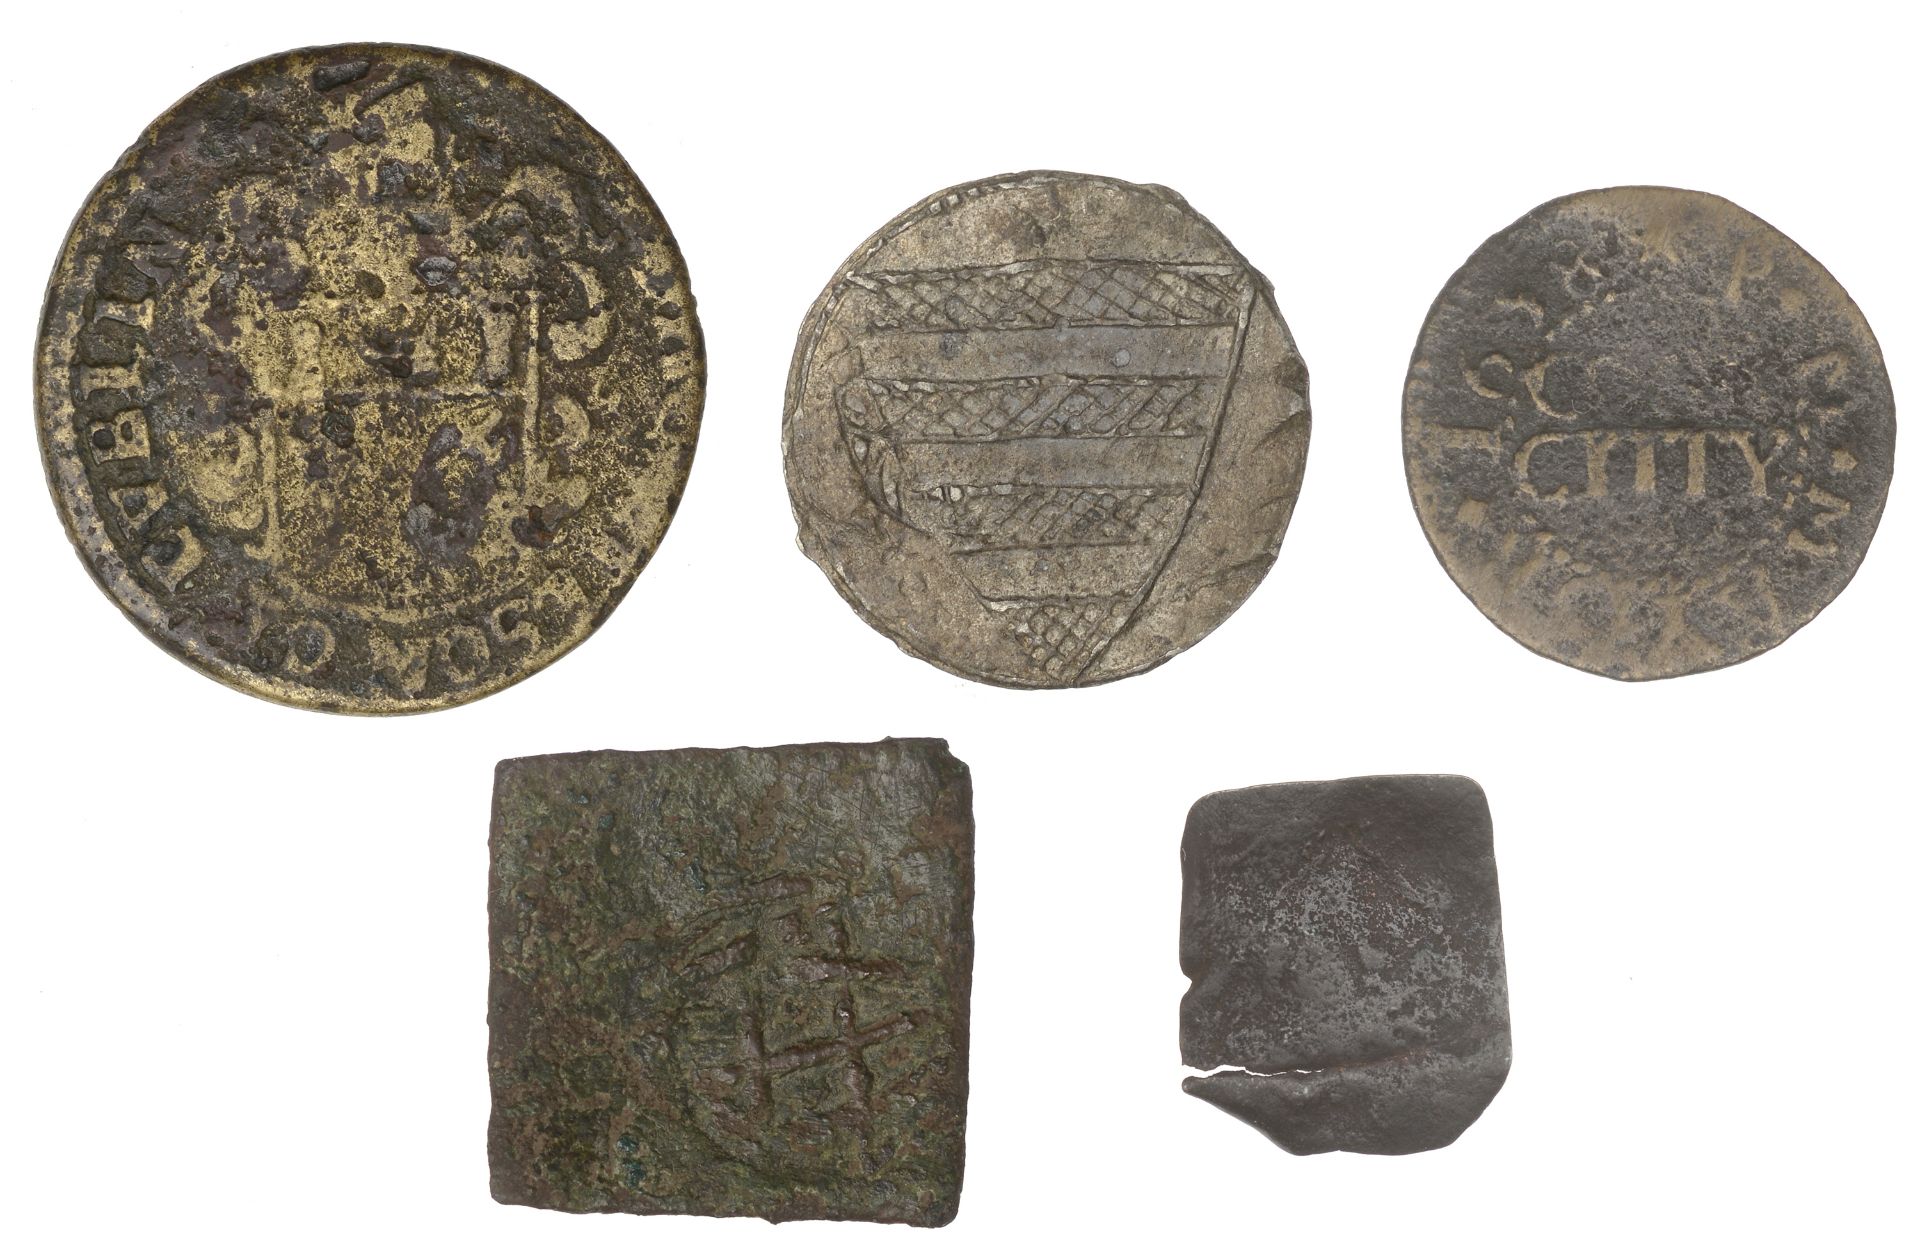 Irish Tokens from the Collection of the late Barry Woodside - Image 2 of 2